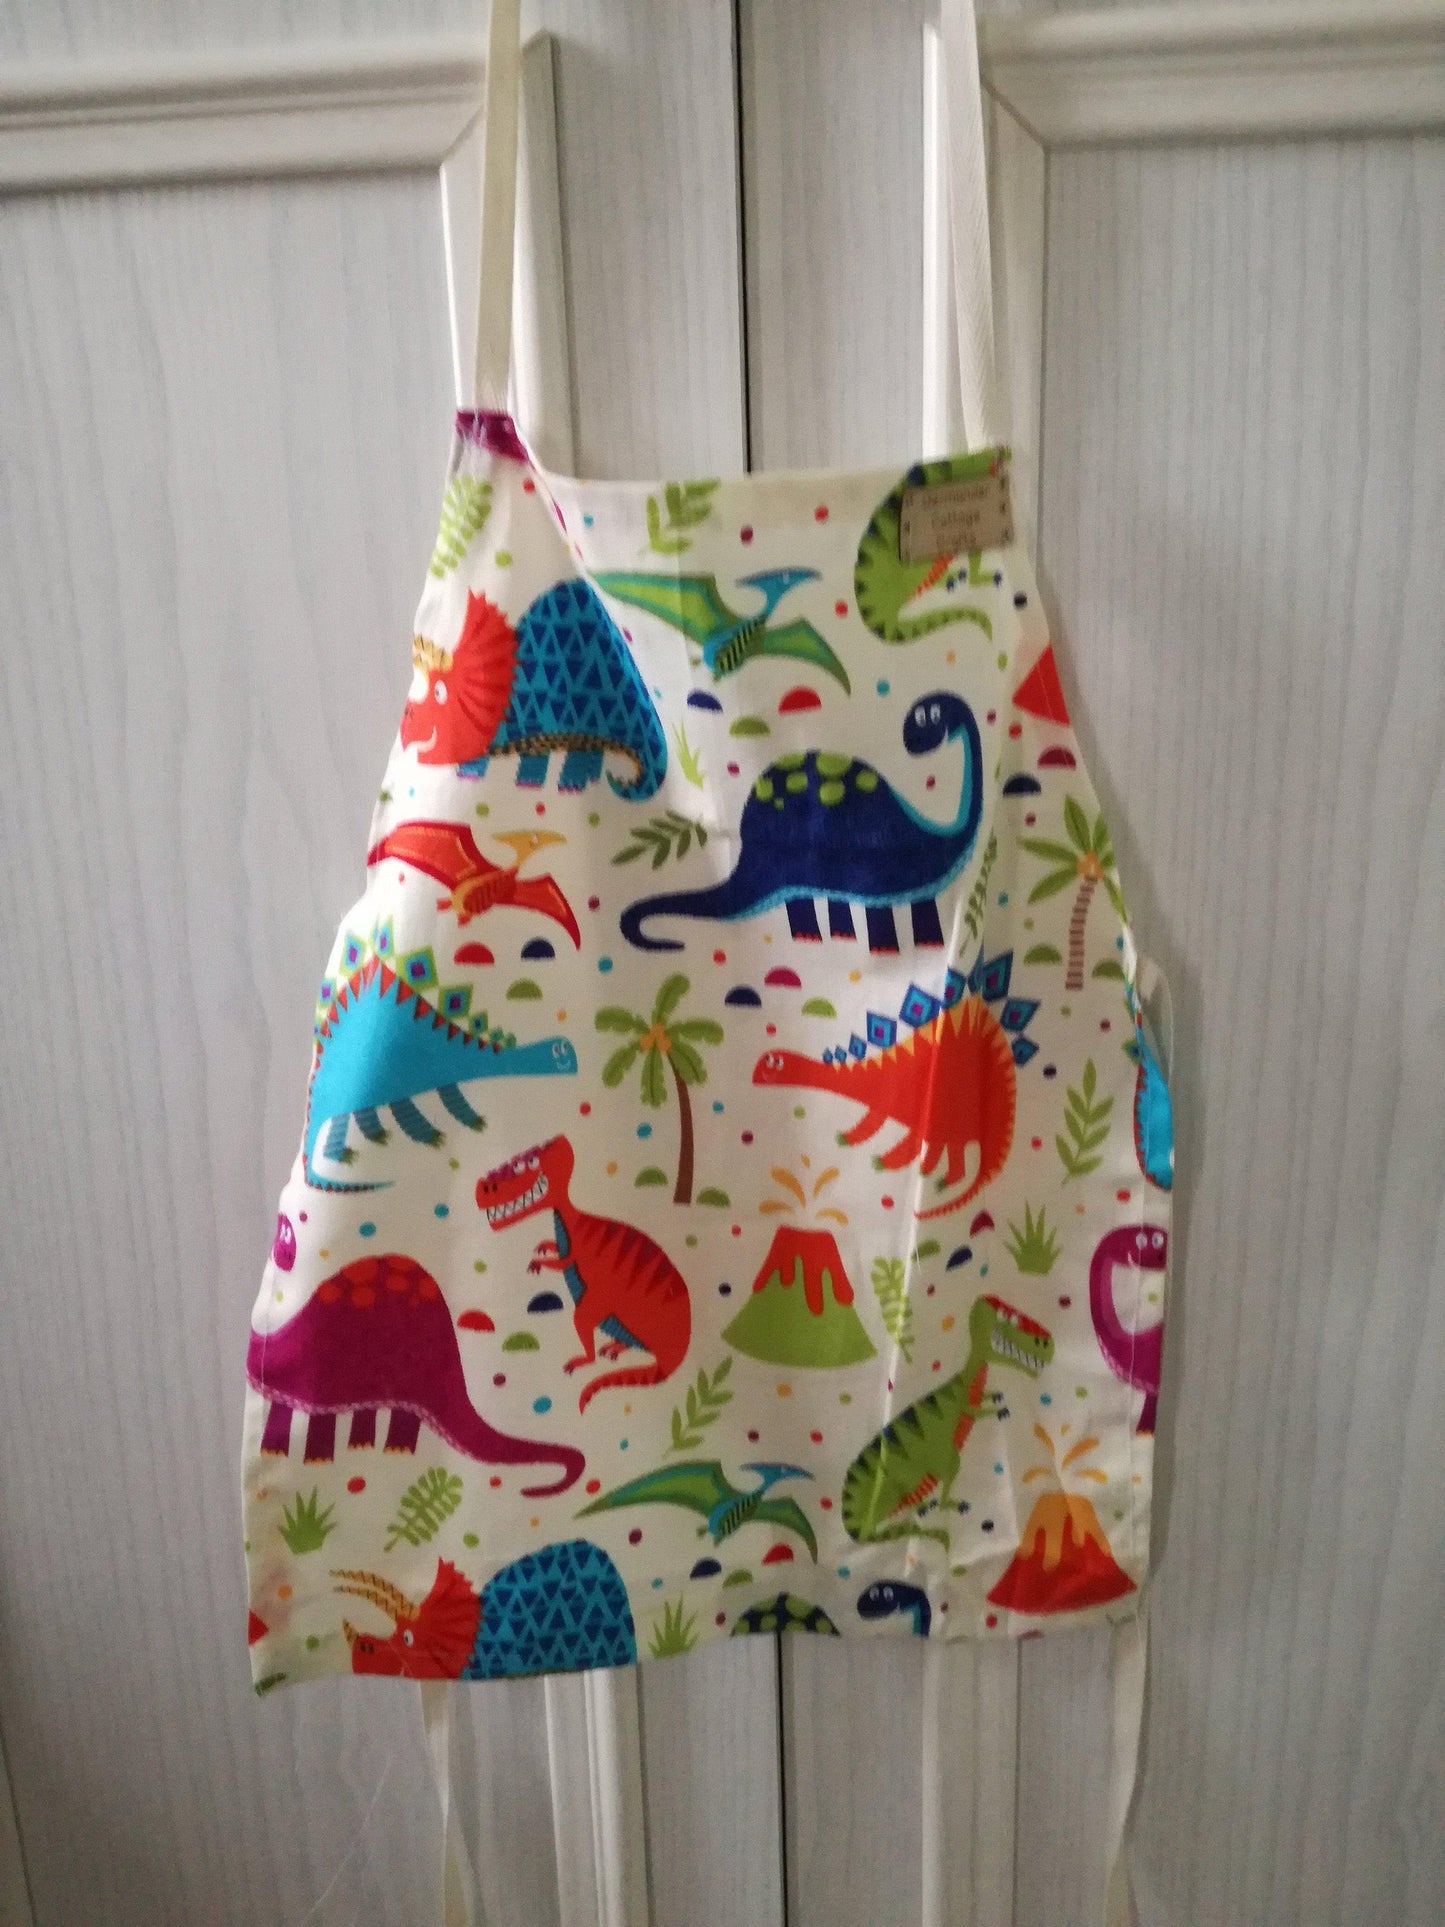 Handmade accessories for kids. Dino aprons for children. Adult novelty aprons